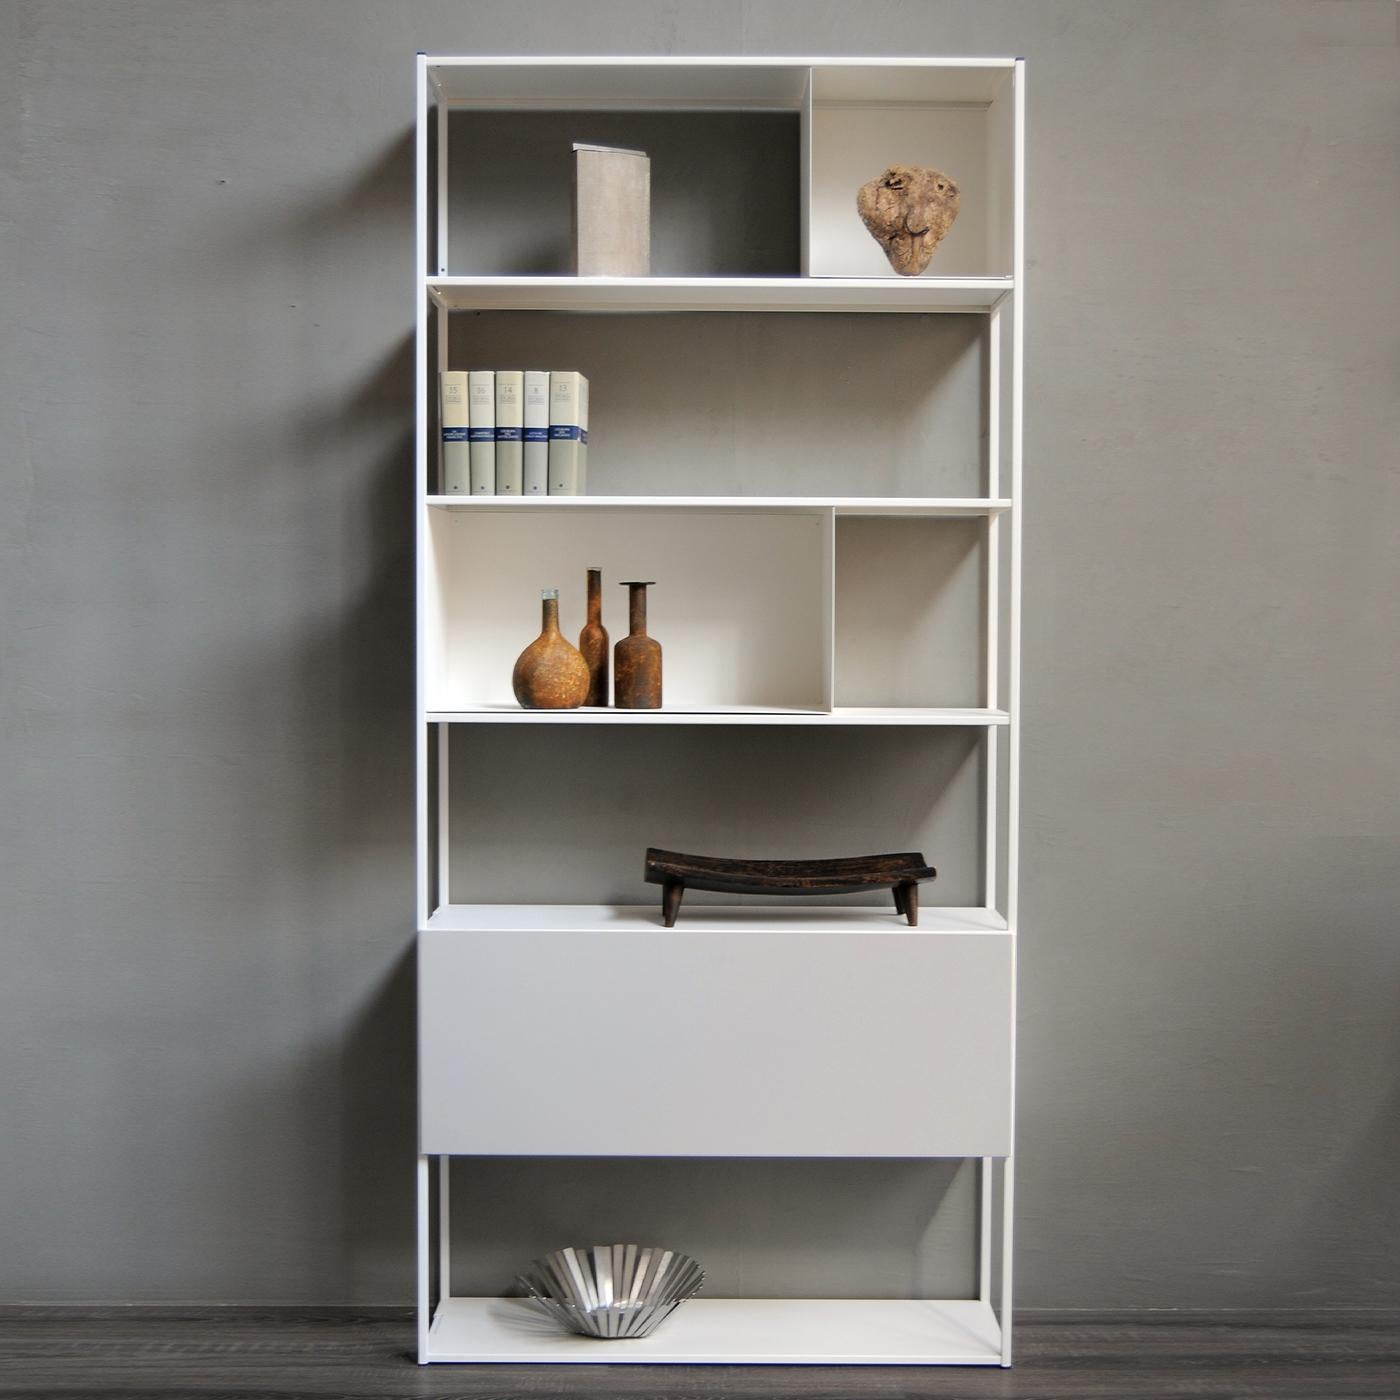 This sleek and luminous shelving unit is designed with functionality and minimalism in mind. The small open box (cm 35 x 31 x 36 H), the closed compartment with hinged door (cm 100 x 34 x 36 H), and the central open box (cm 100 x 31 x 36 H) are all